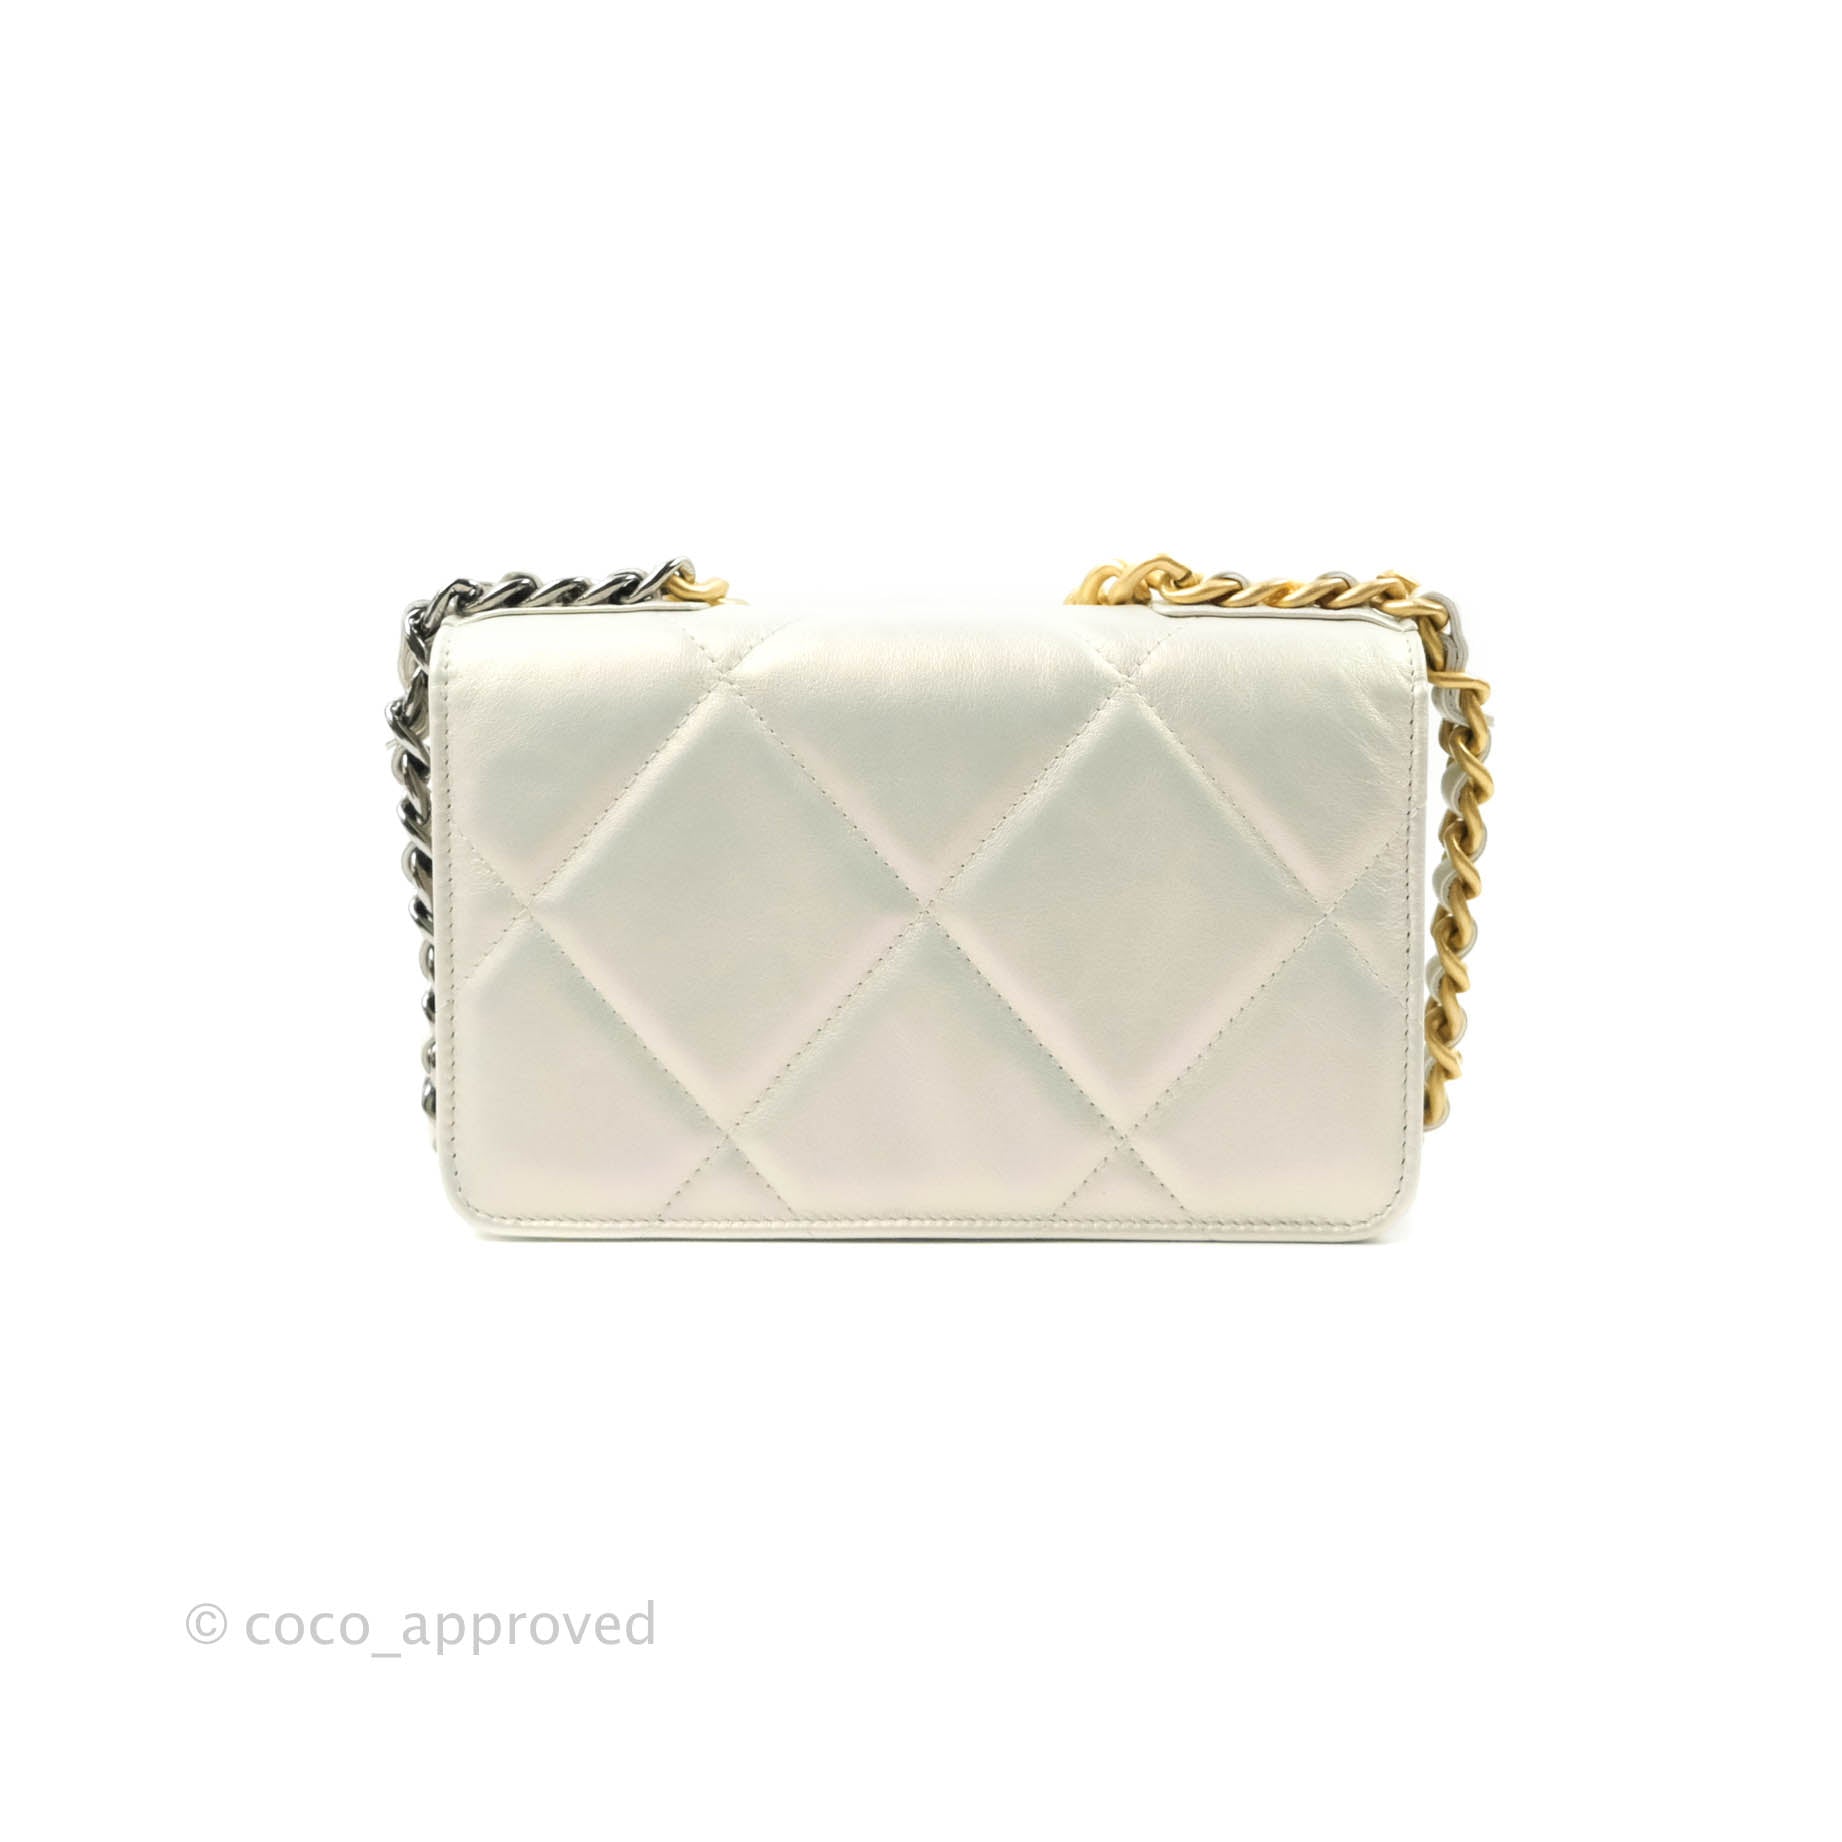 21K CHANEL Bag, Wallet on the Chain, Iridescent White Bow WOC NWT